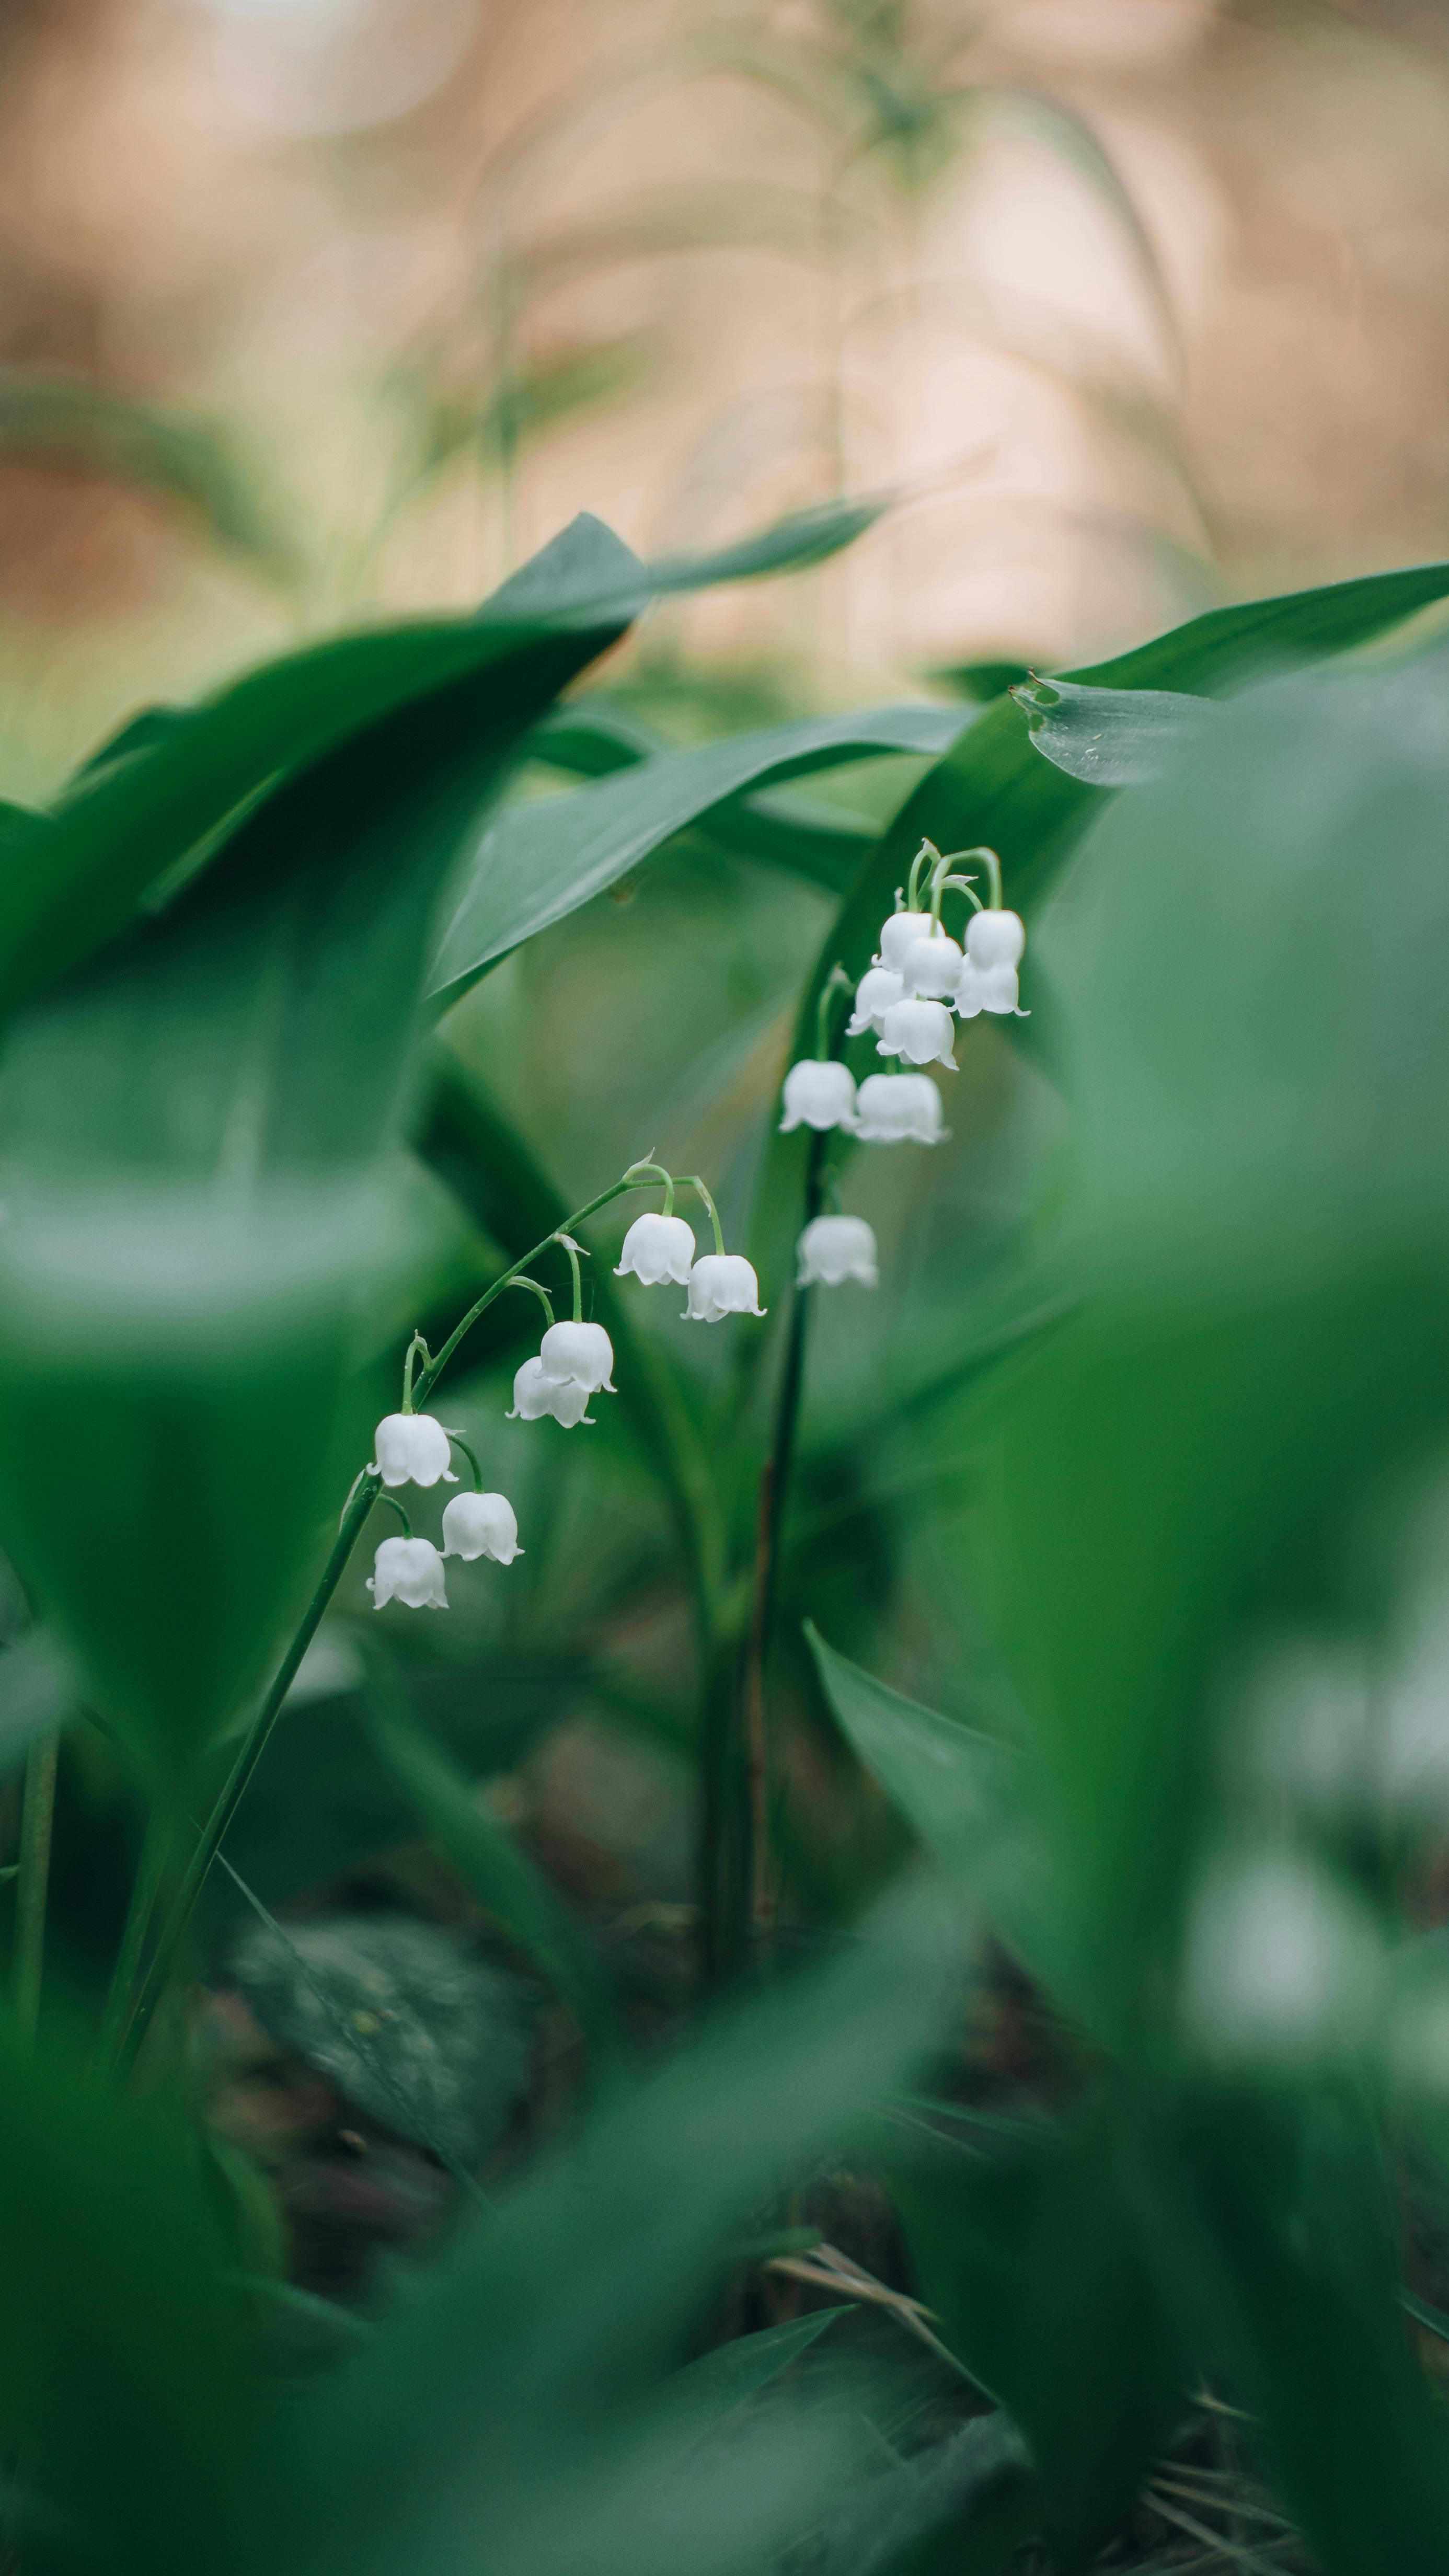 18,231+ Best Free Lily of the valley Stock Photos & Images · 100% ...